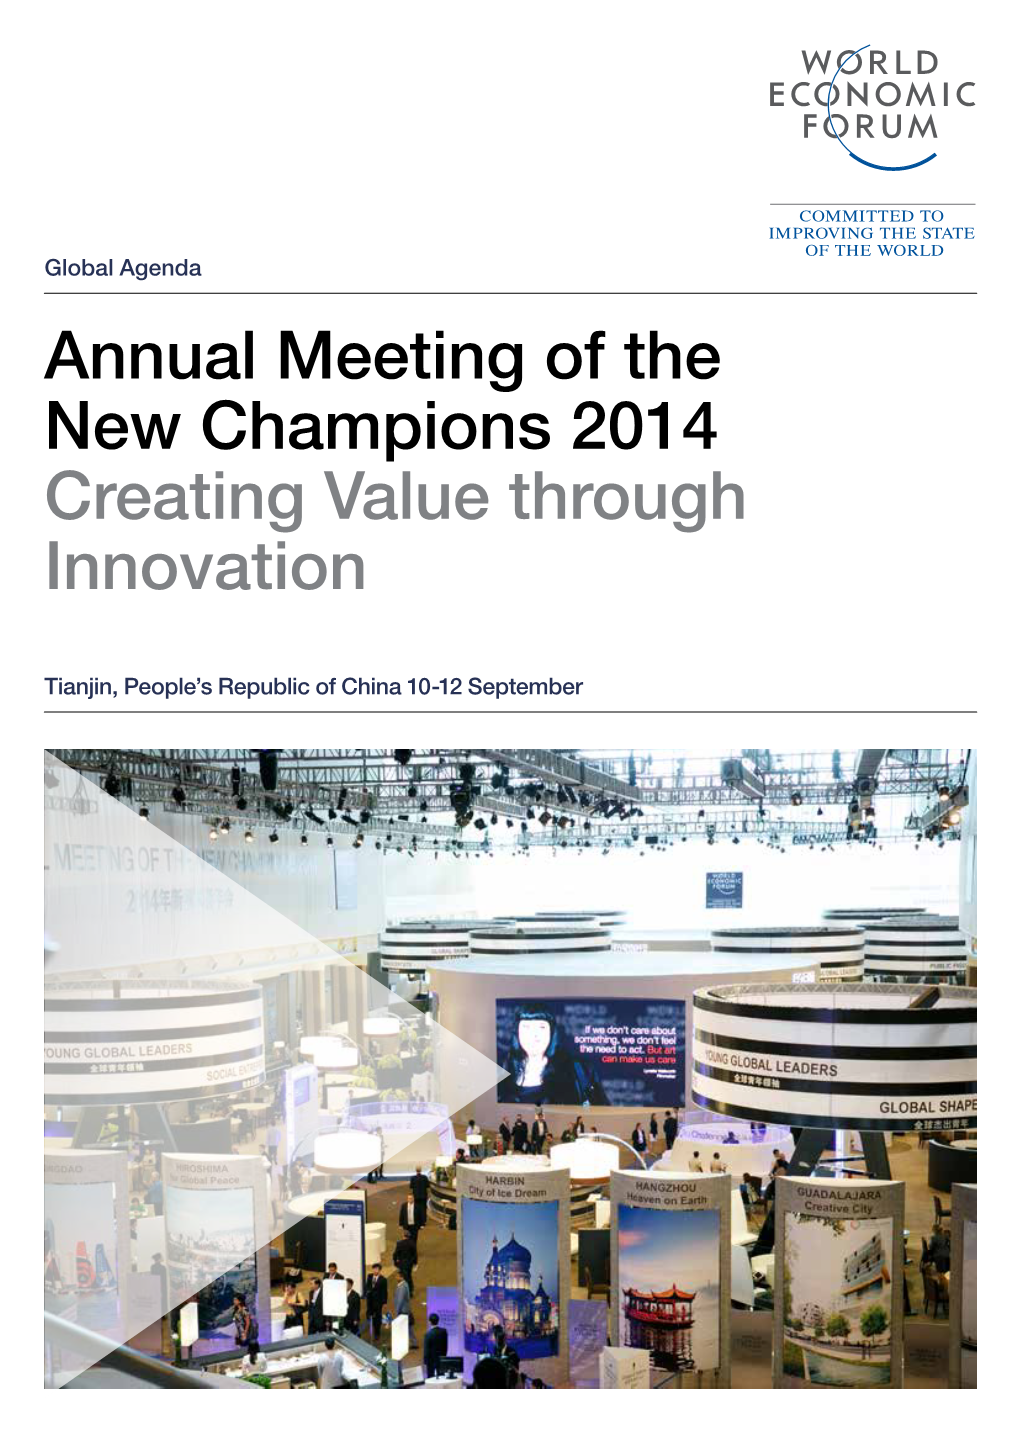 Annual Meeting of the New Champions 2014 Creating Value Through Innovation